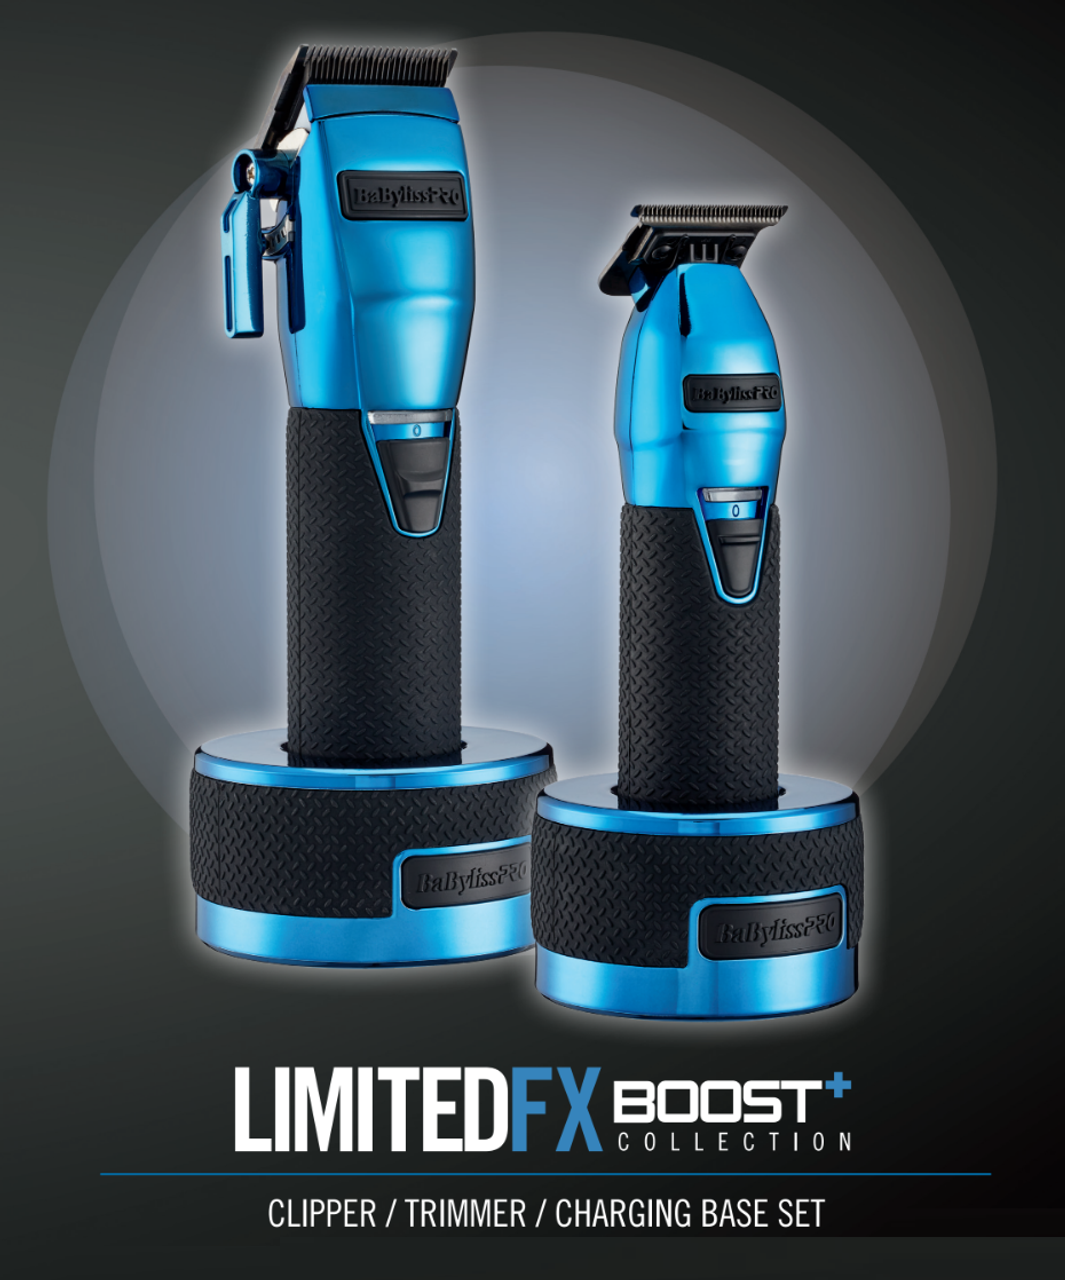 BaByliss Pro LimitedFX Boost+ Collection with Clipper, Trimmer